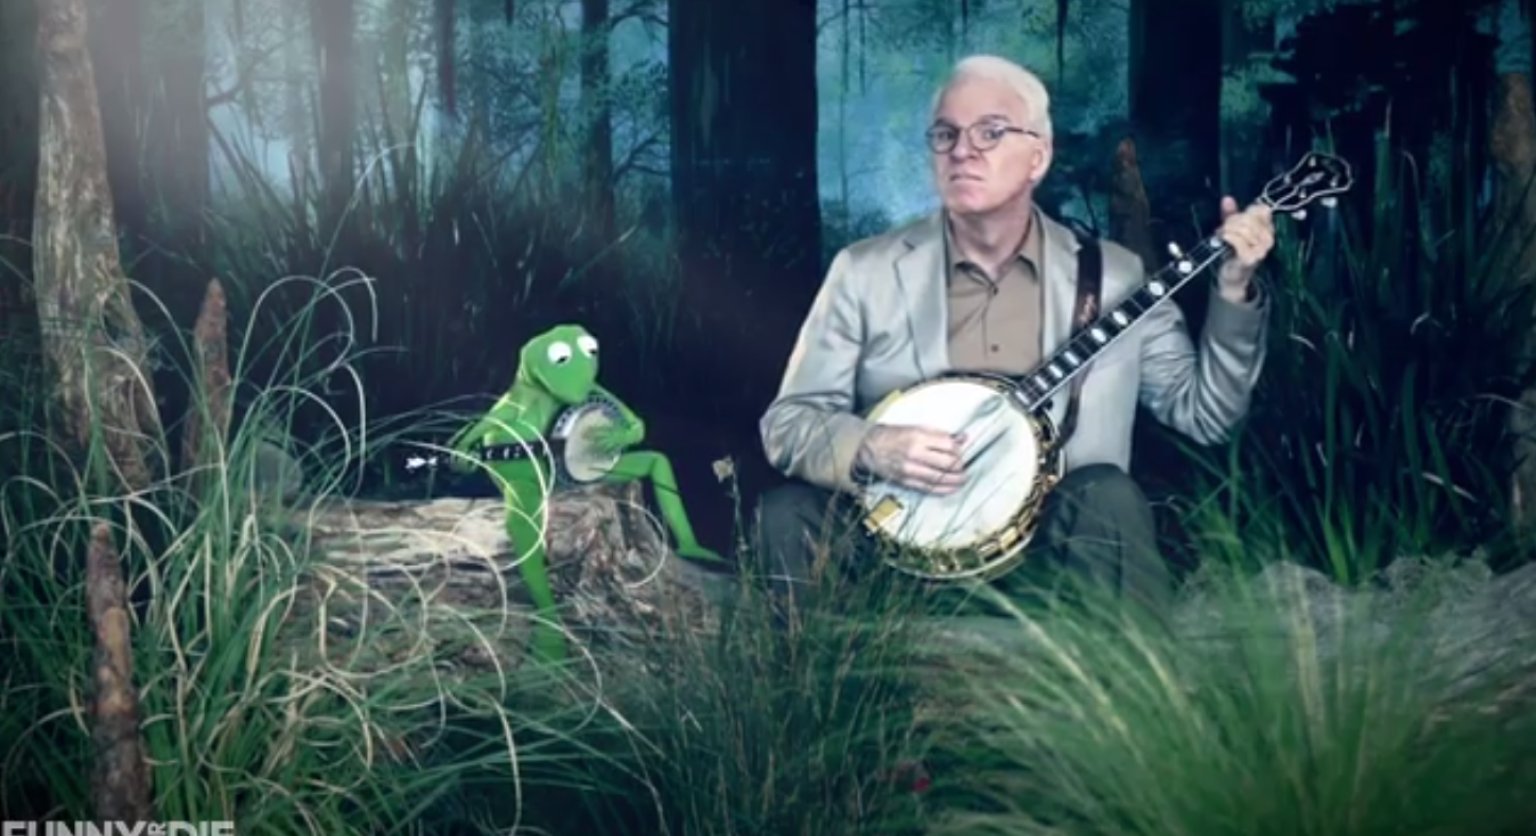 Kermit the Frog and Steve Martin: duelling banjos